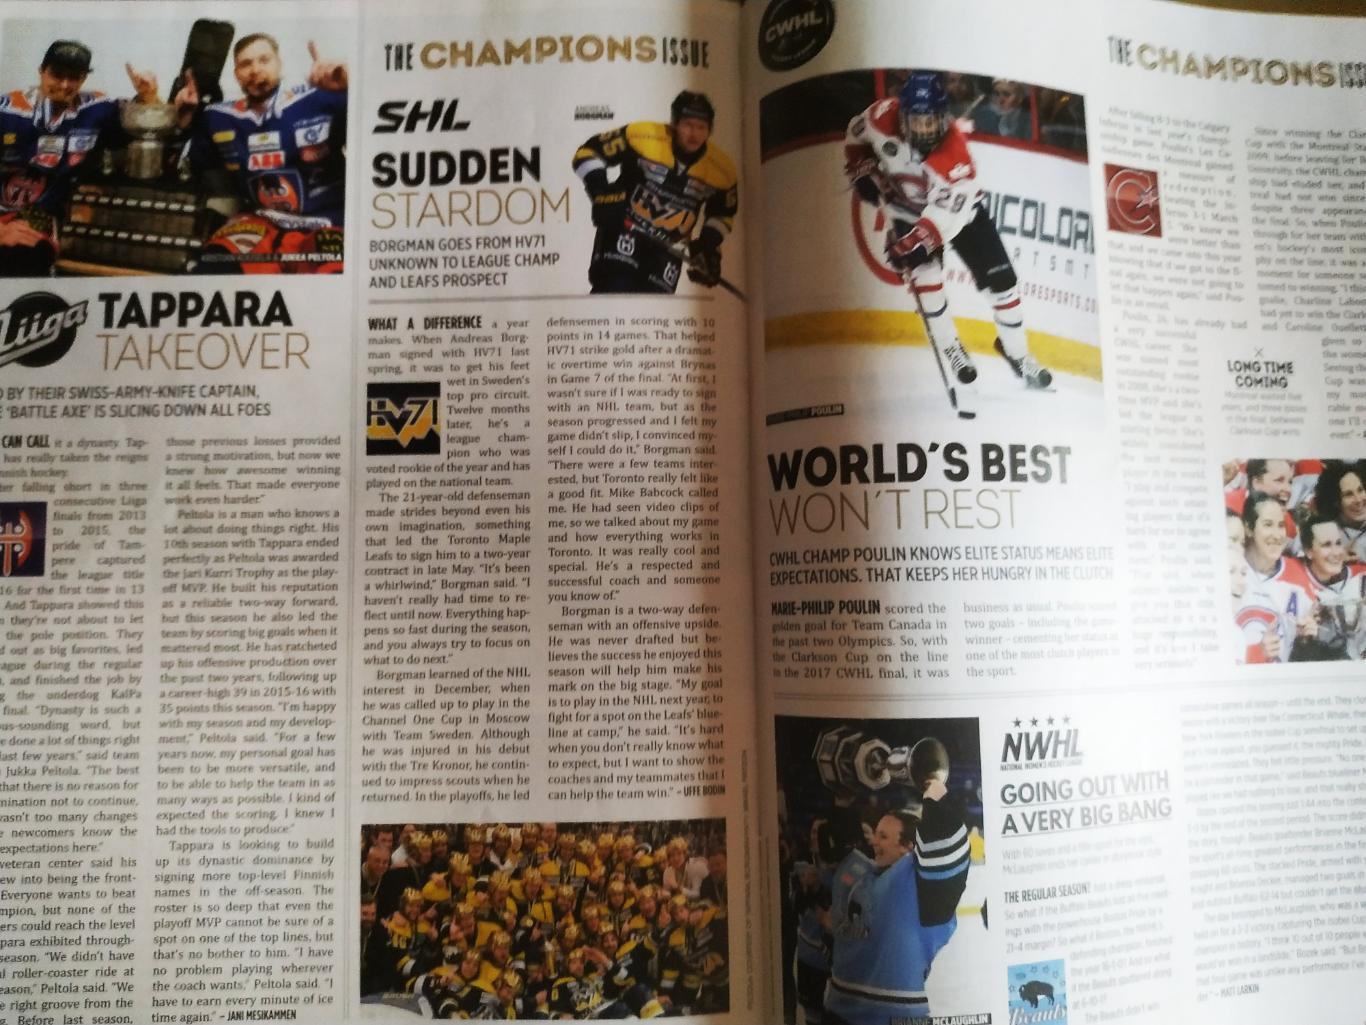 ЖУРНАЛ 2017 AUG 21 THE HOCKEY NEWS STANLEY CUP CHAMPIONS HISTORY IS MADE 7